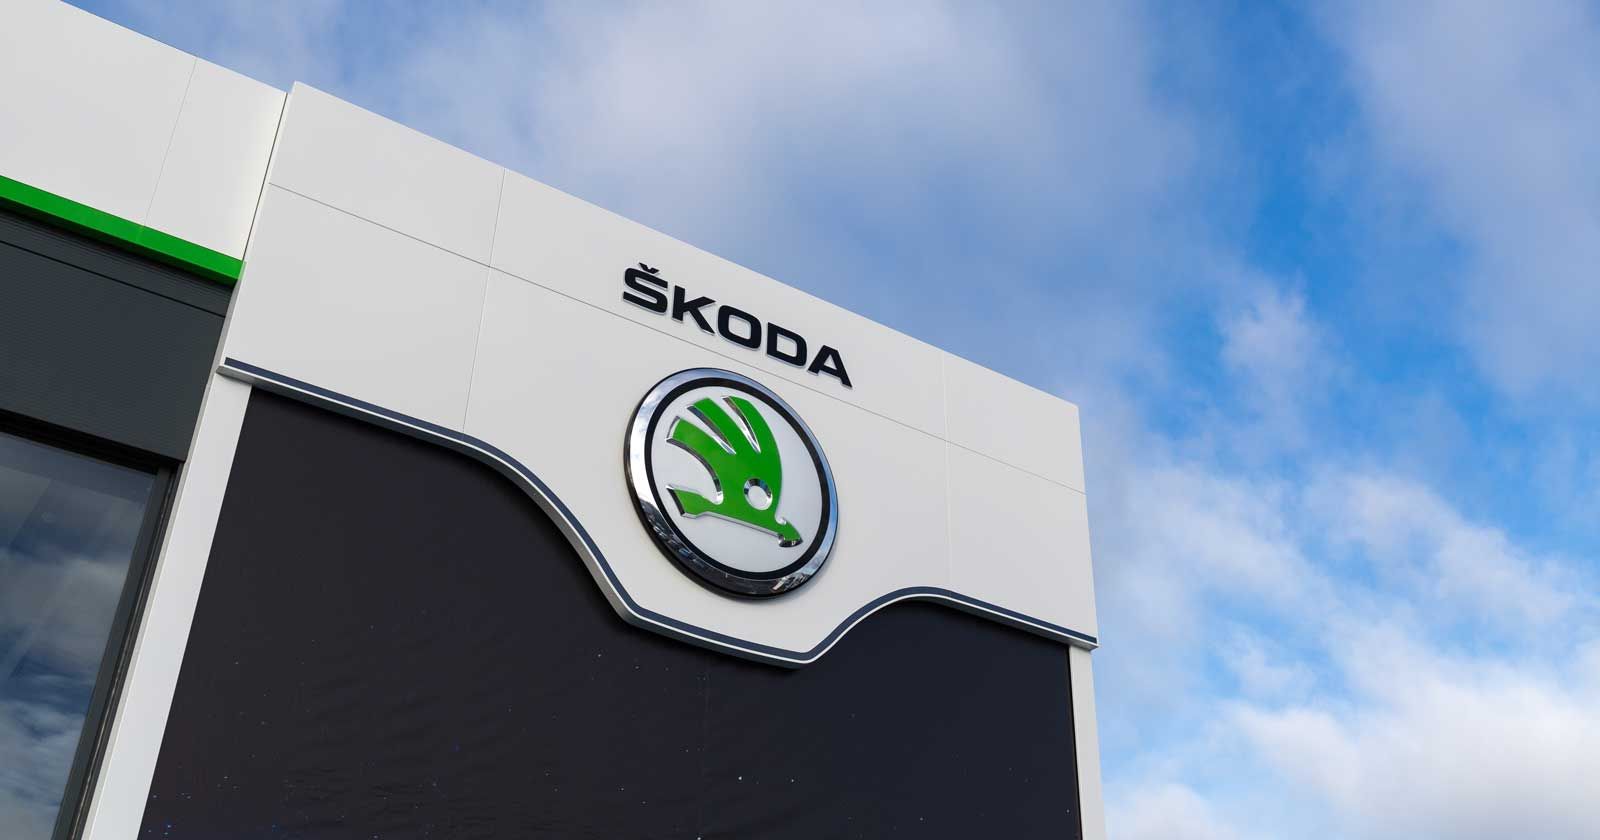 Horton-Skoda-Lincoln-Car-Showroom-exterior-signage-by-APSS